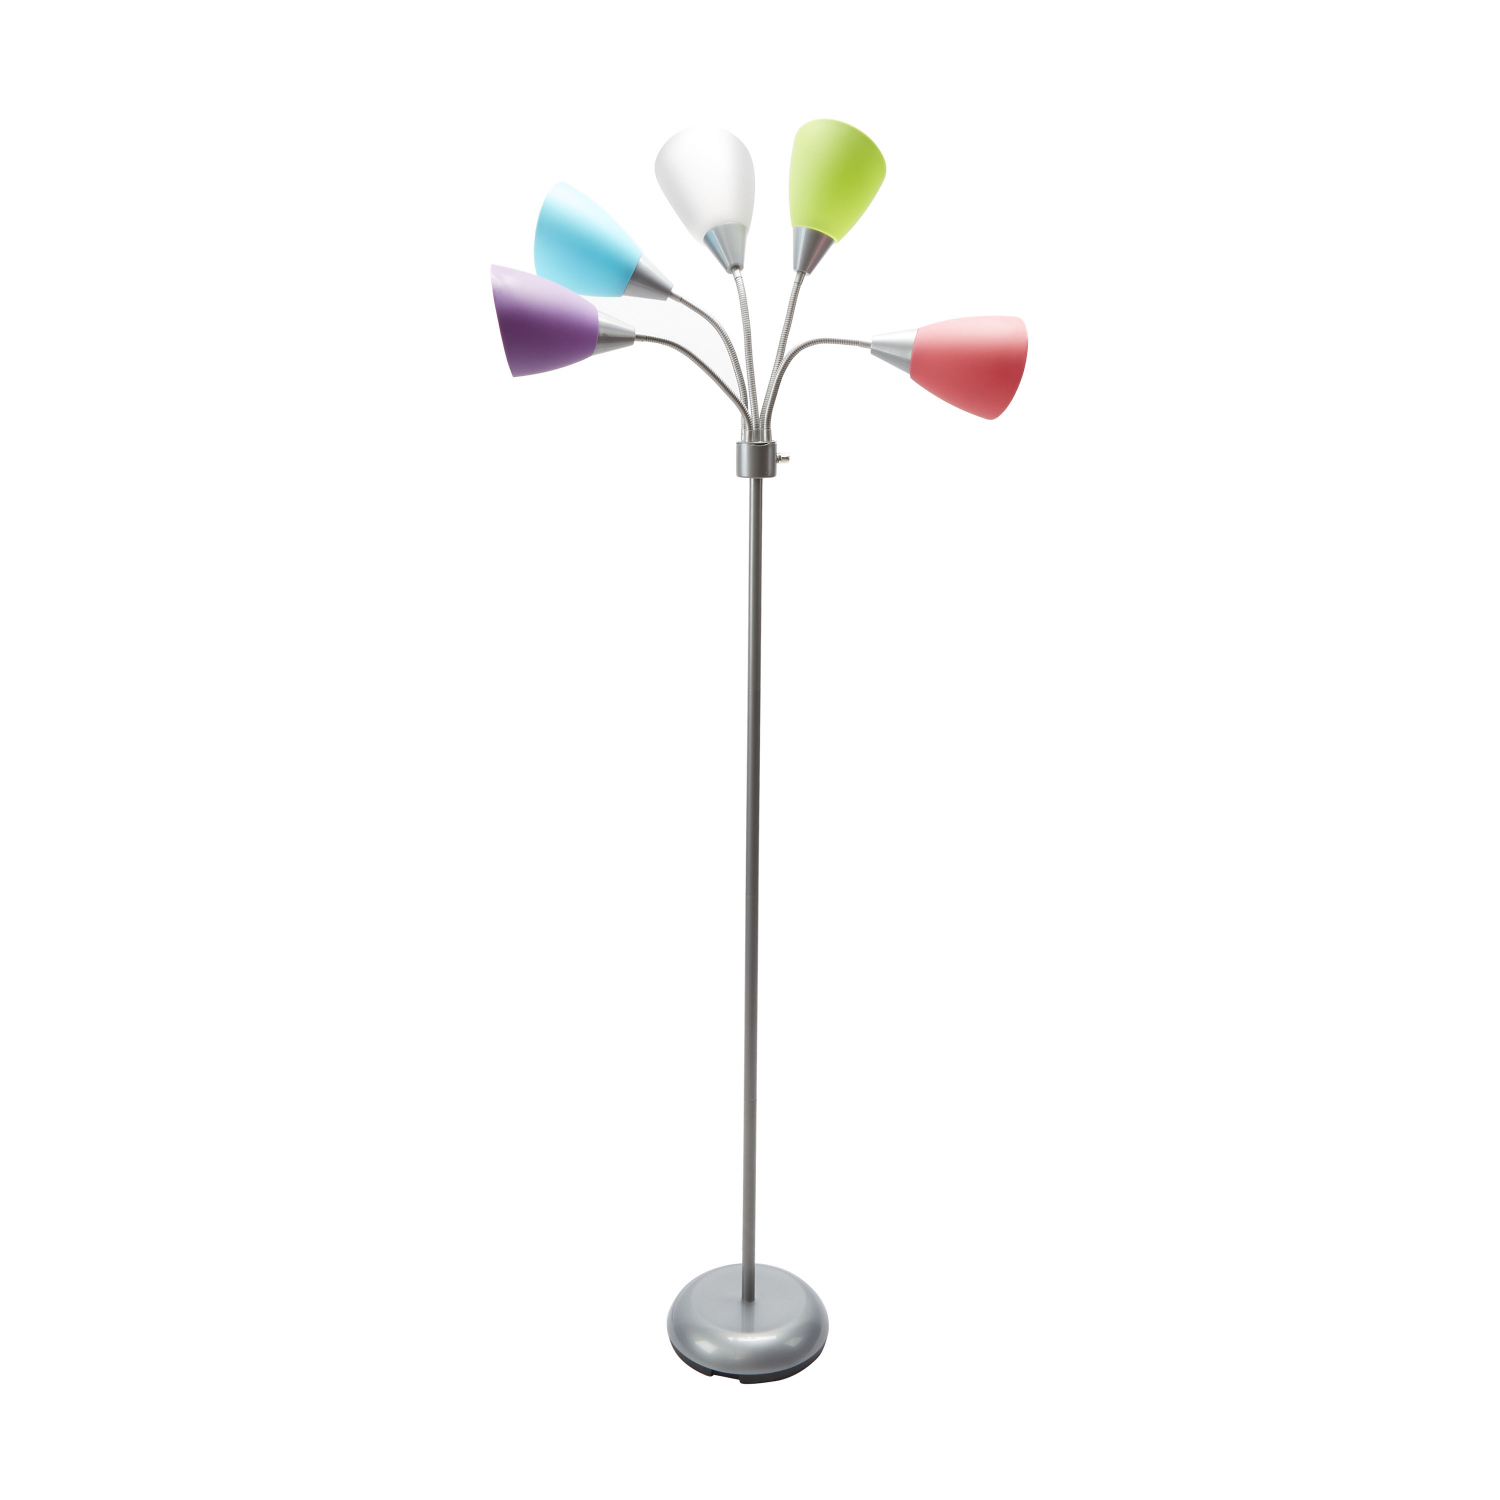 Details About Floor Lamp Stand W 5 Multi Color Light Shade Adjustable Arm Room Lighting Dorm throughout measurements 1500 X 1500